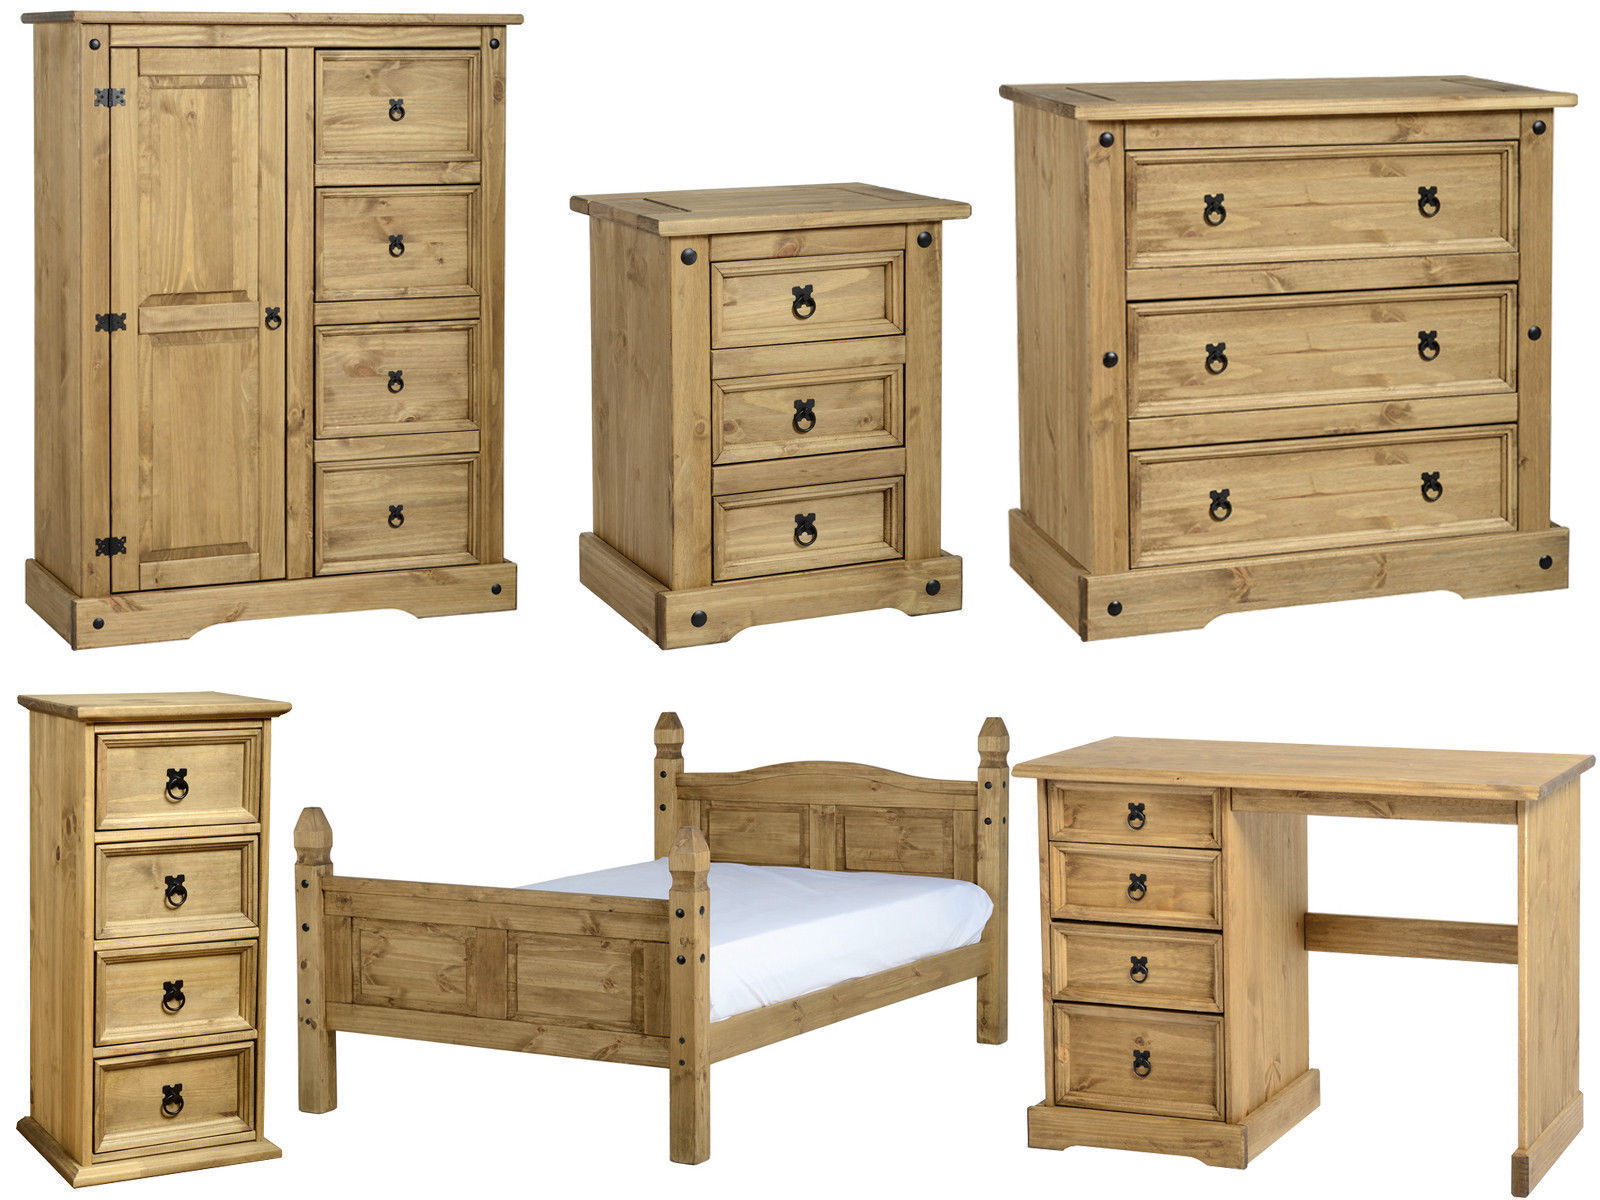 Details About Seconique Corona Mexican Solid Pine Bedroom Furniture Range Waxed Pine pertaining to size 1600 X 1200